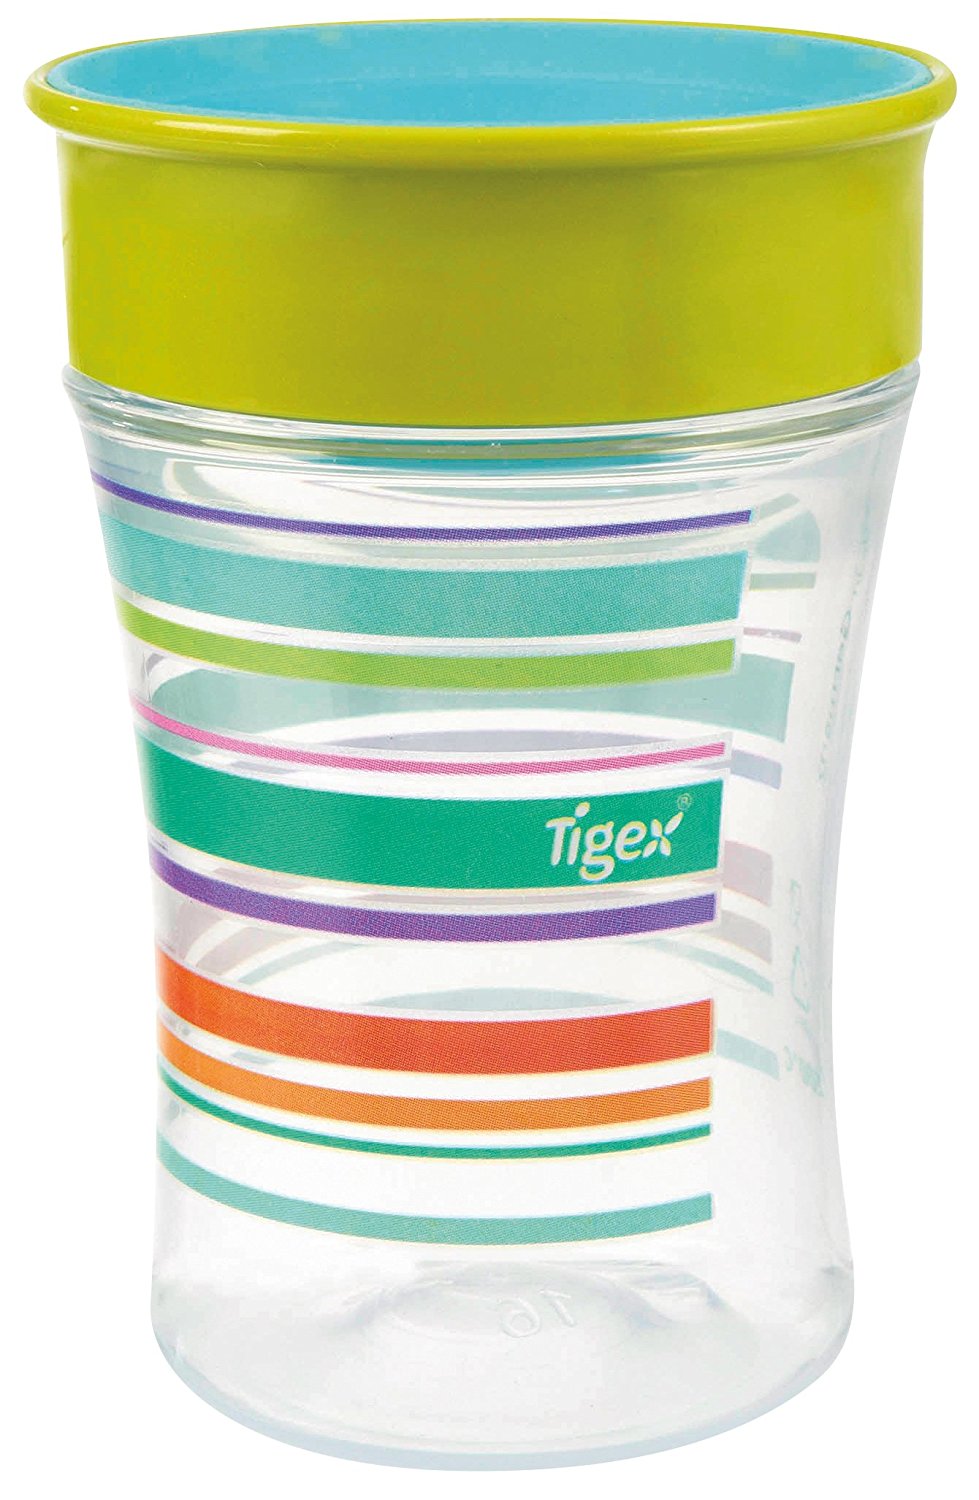 Tigex Tasse D Apprentissage Pour Bebe Smart 360 Cooking For My Baby